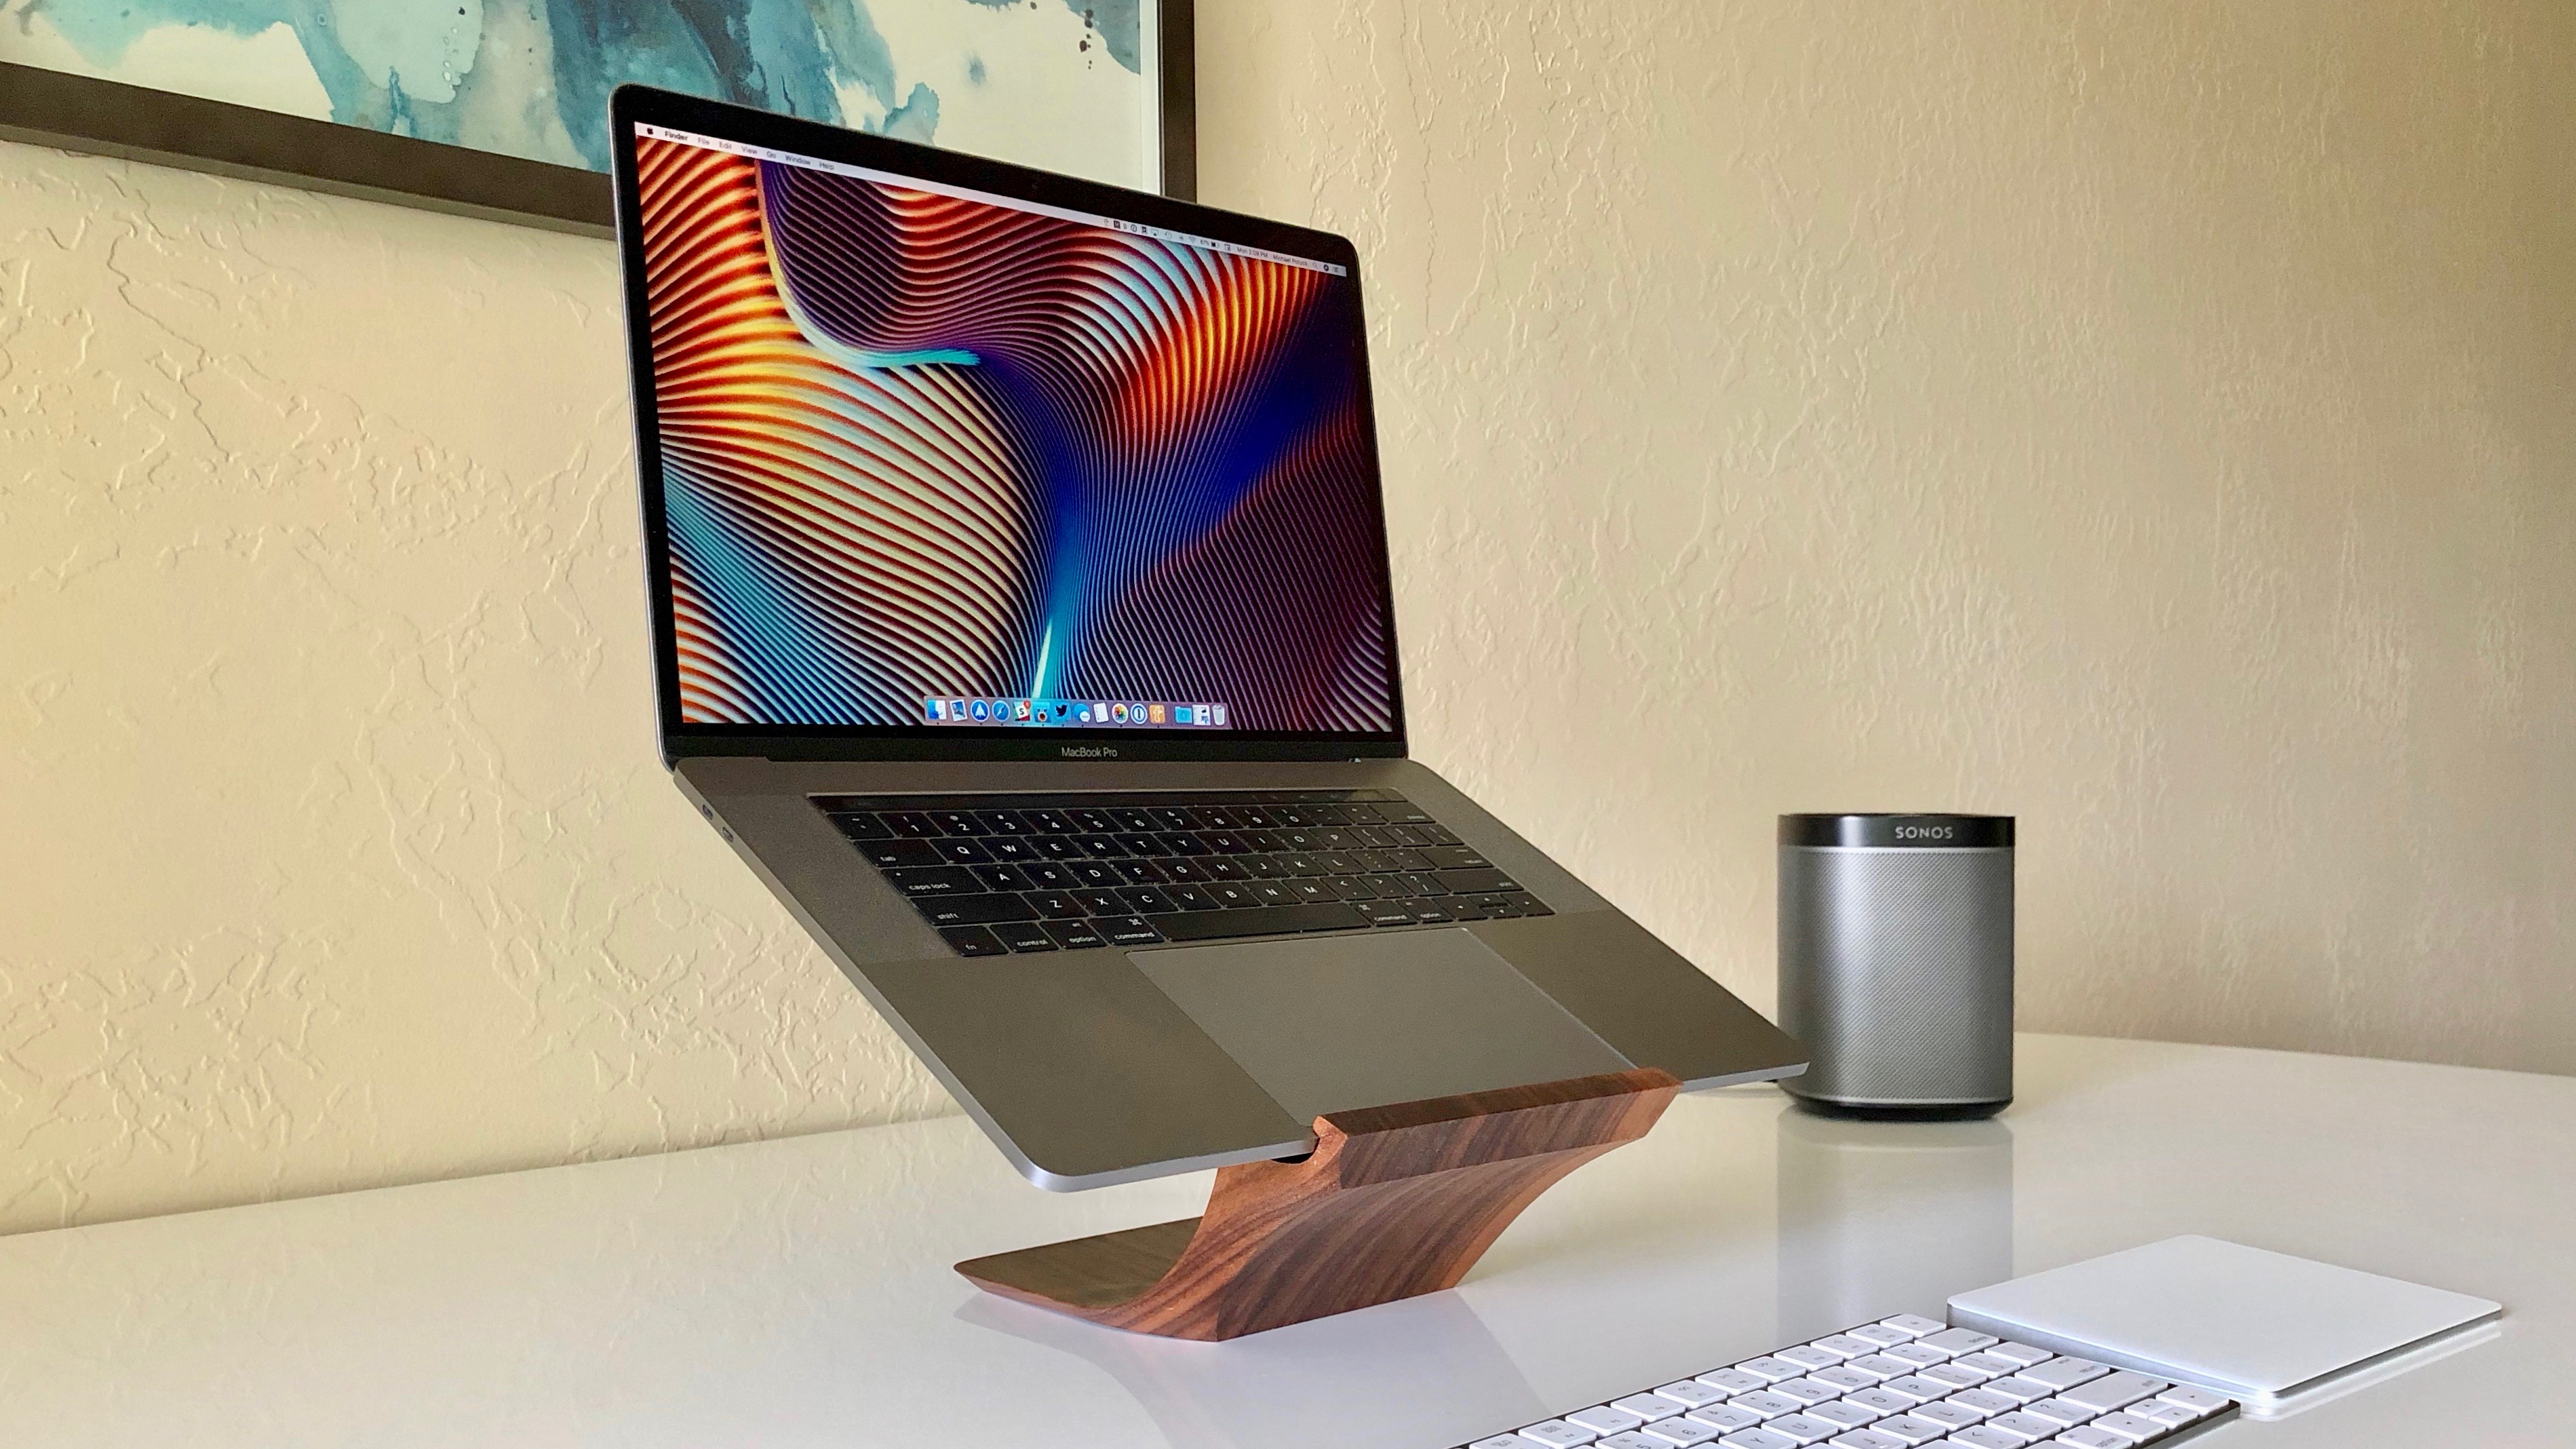 https://9to5mac.com/wp-content/uploads/sites/6/2018/09/yohann-macbook-pro-stand-1.jpg?quality=82&strip=all